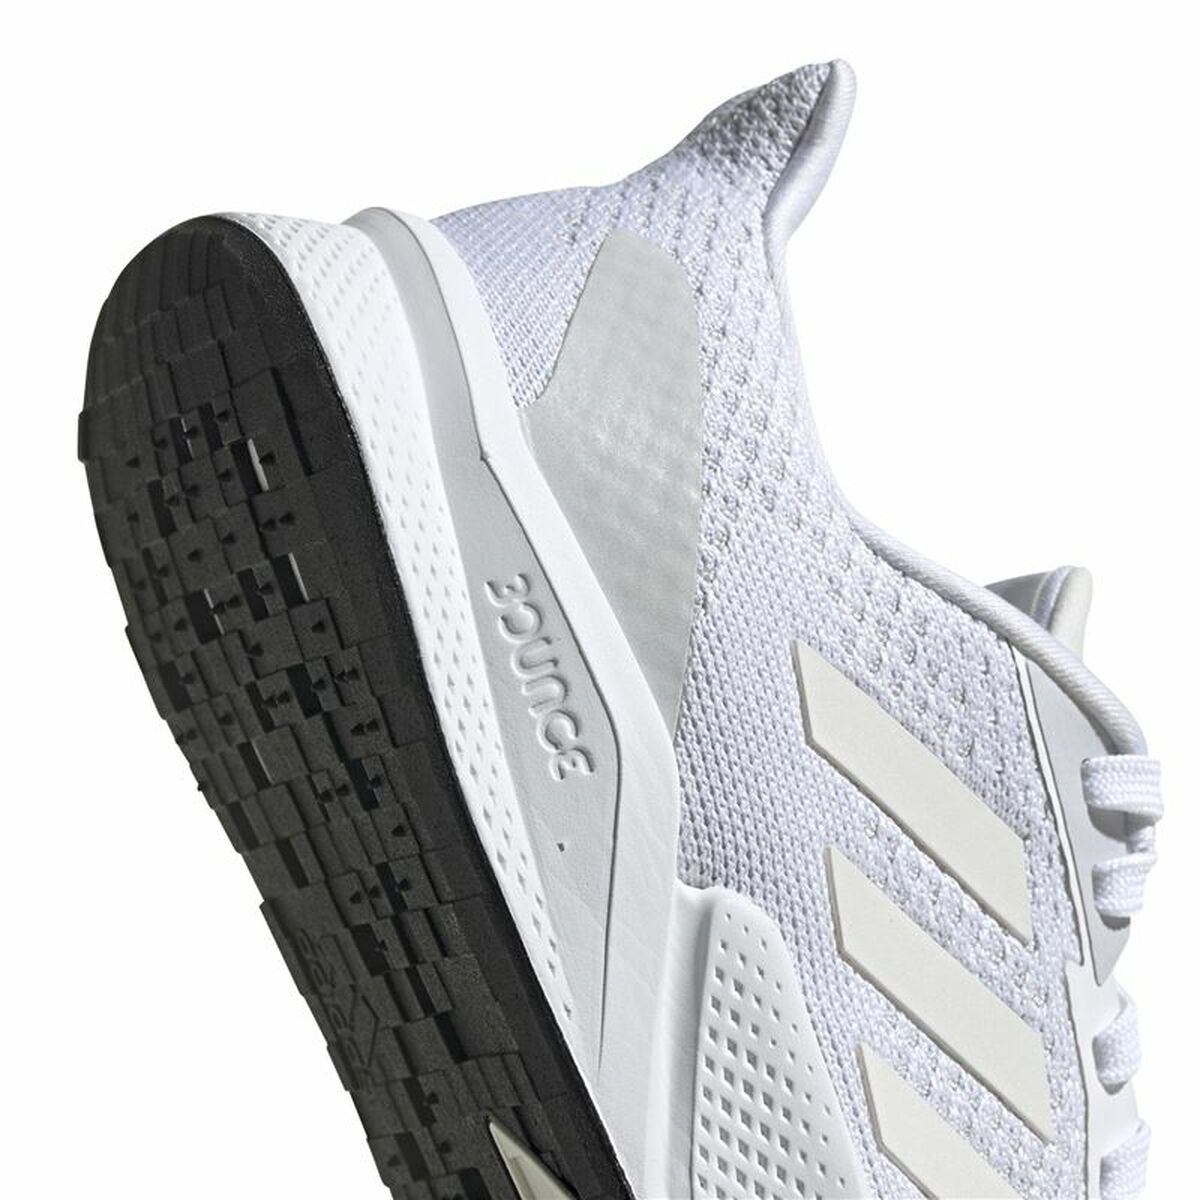 Running Shoes for Adults Adidas X9000L2 White Lady